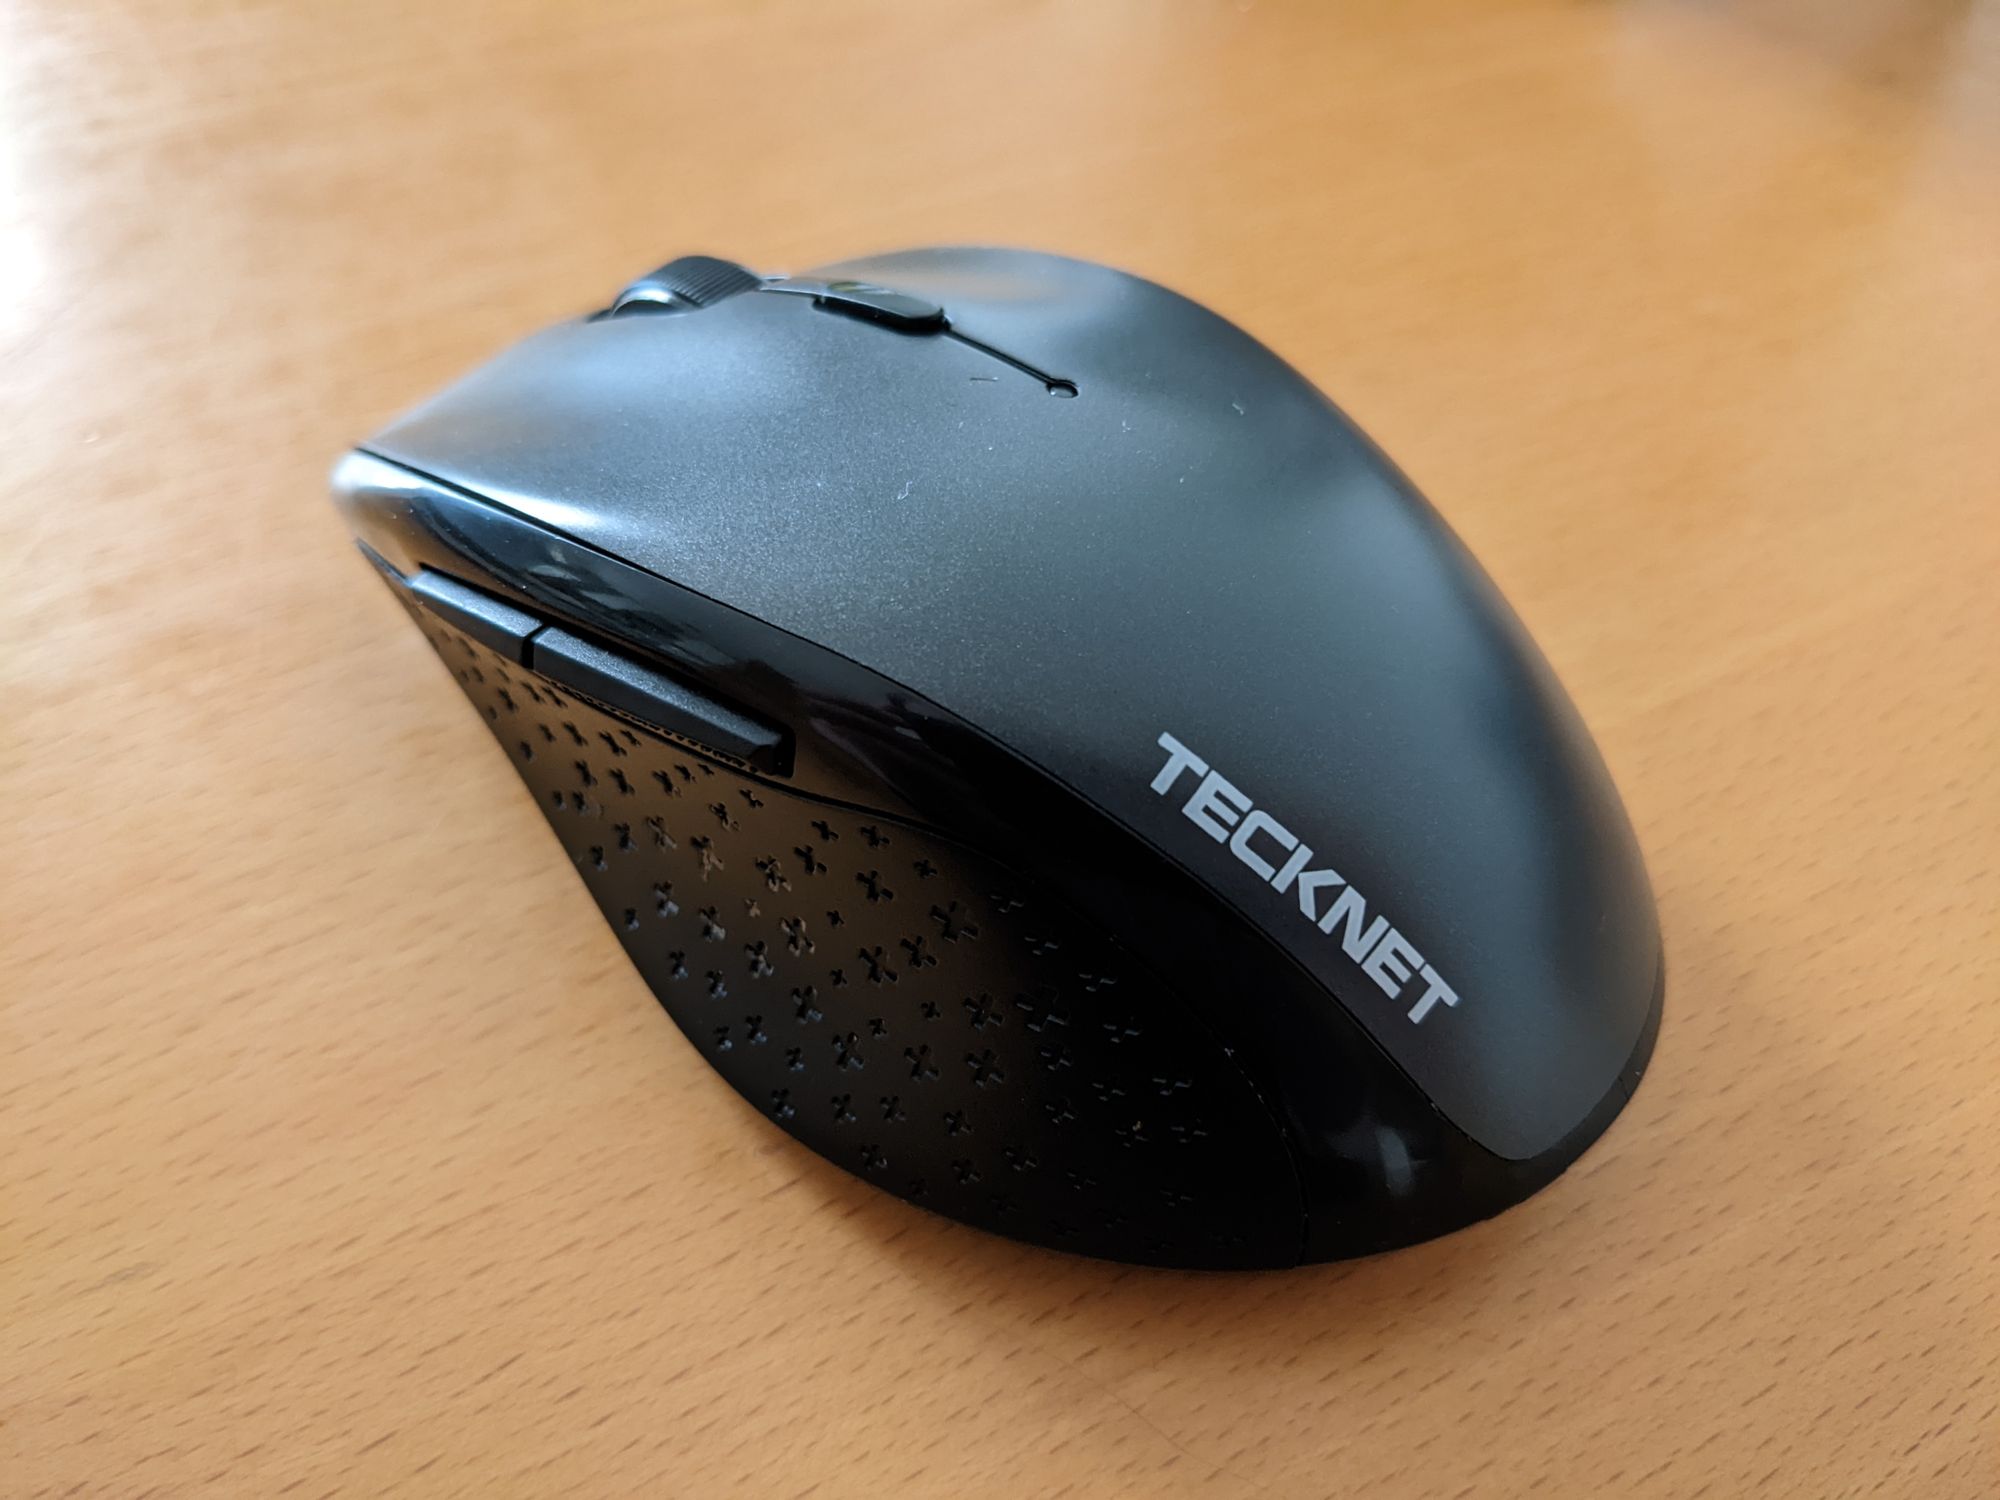 A dark grey computer mouse made by Tecknet